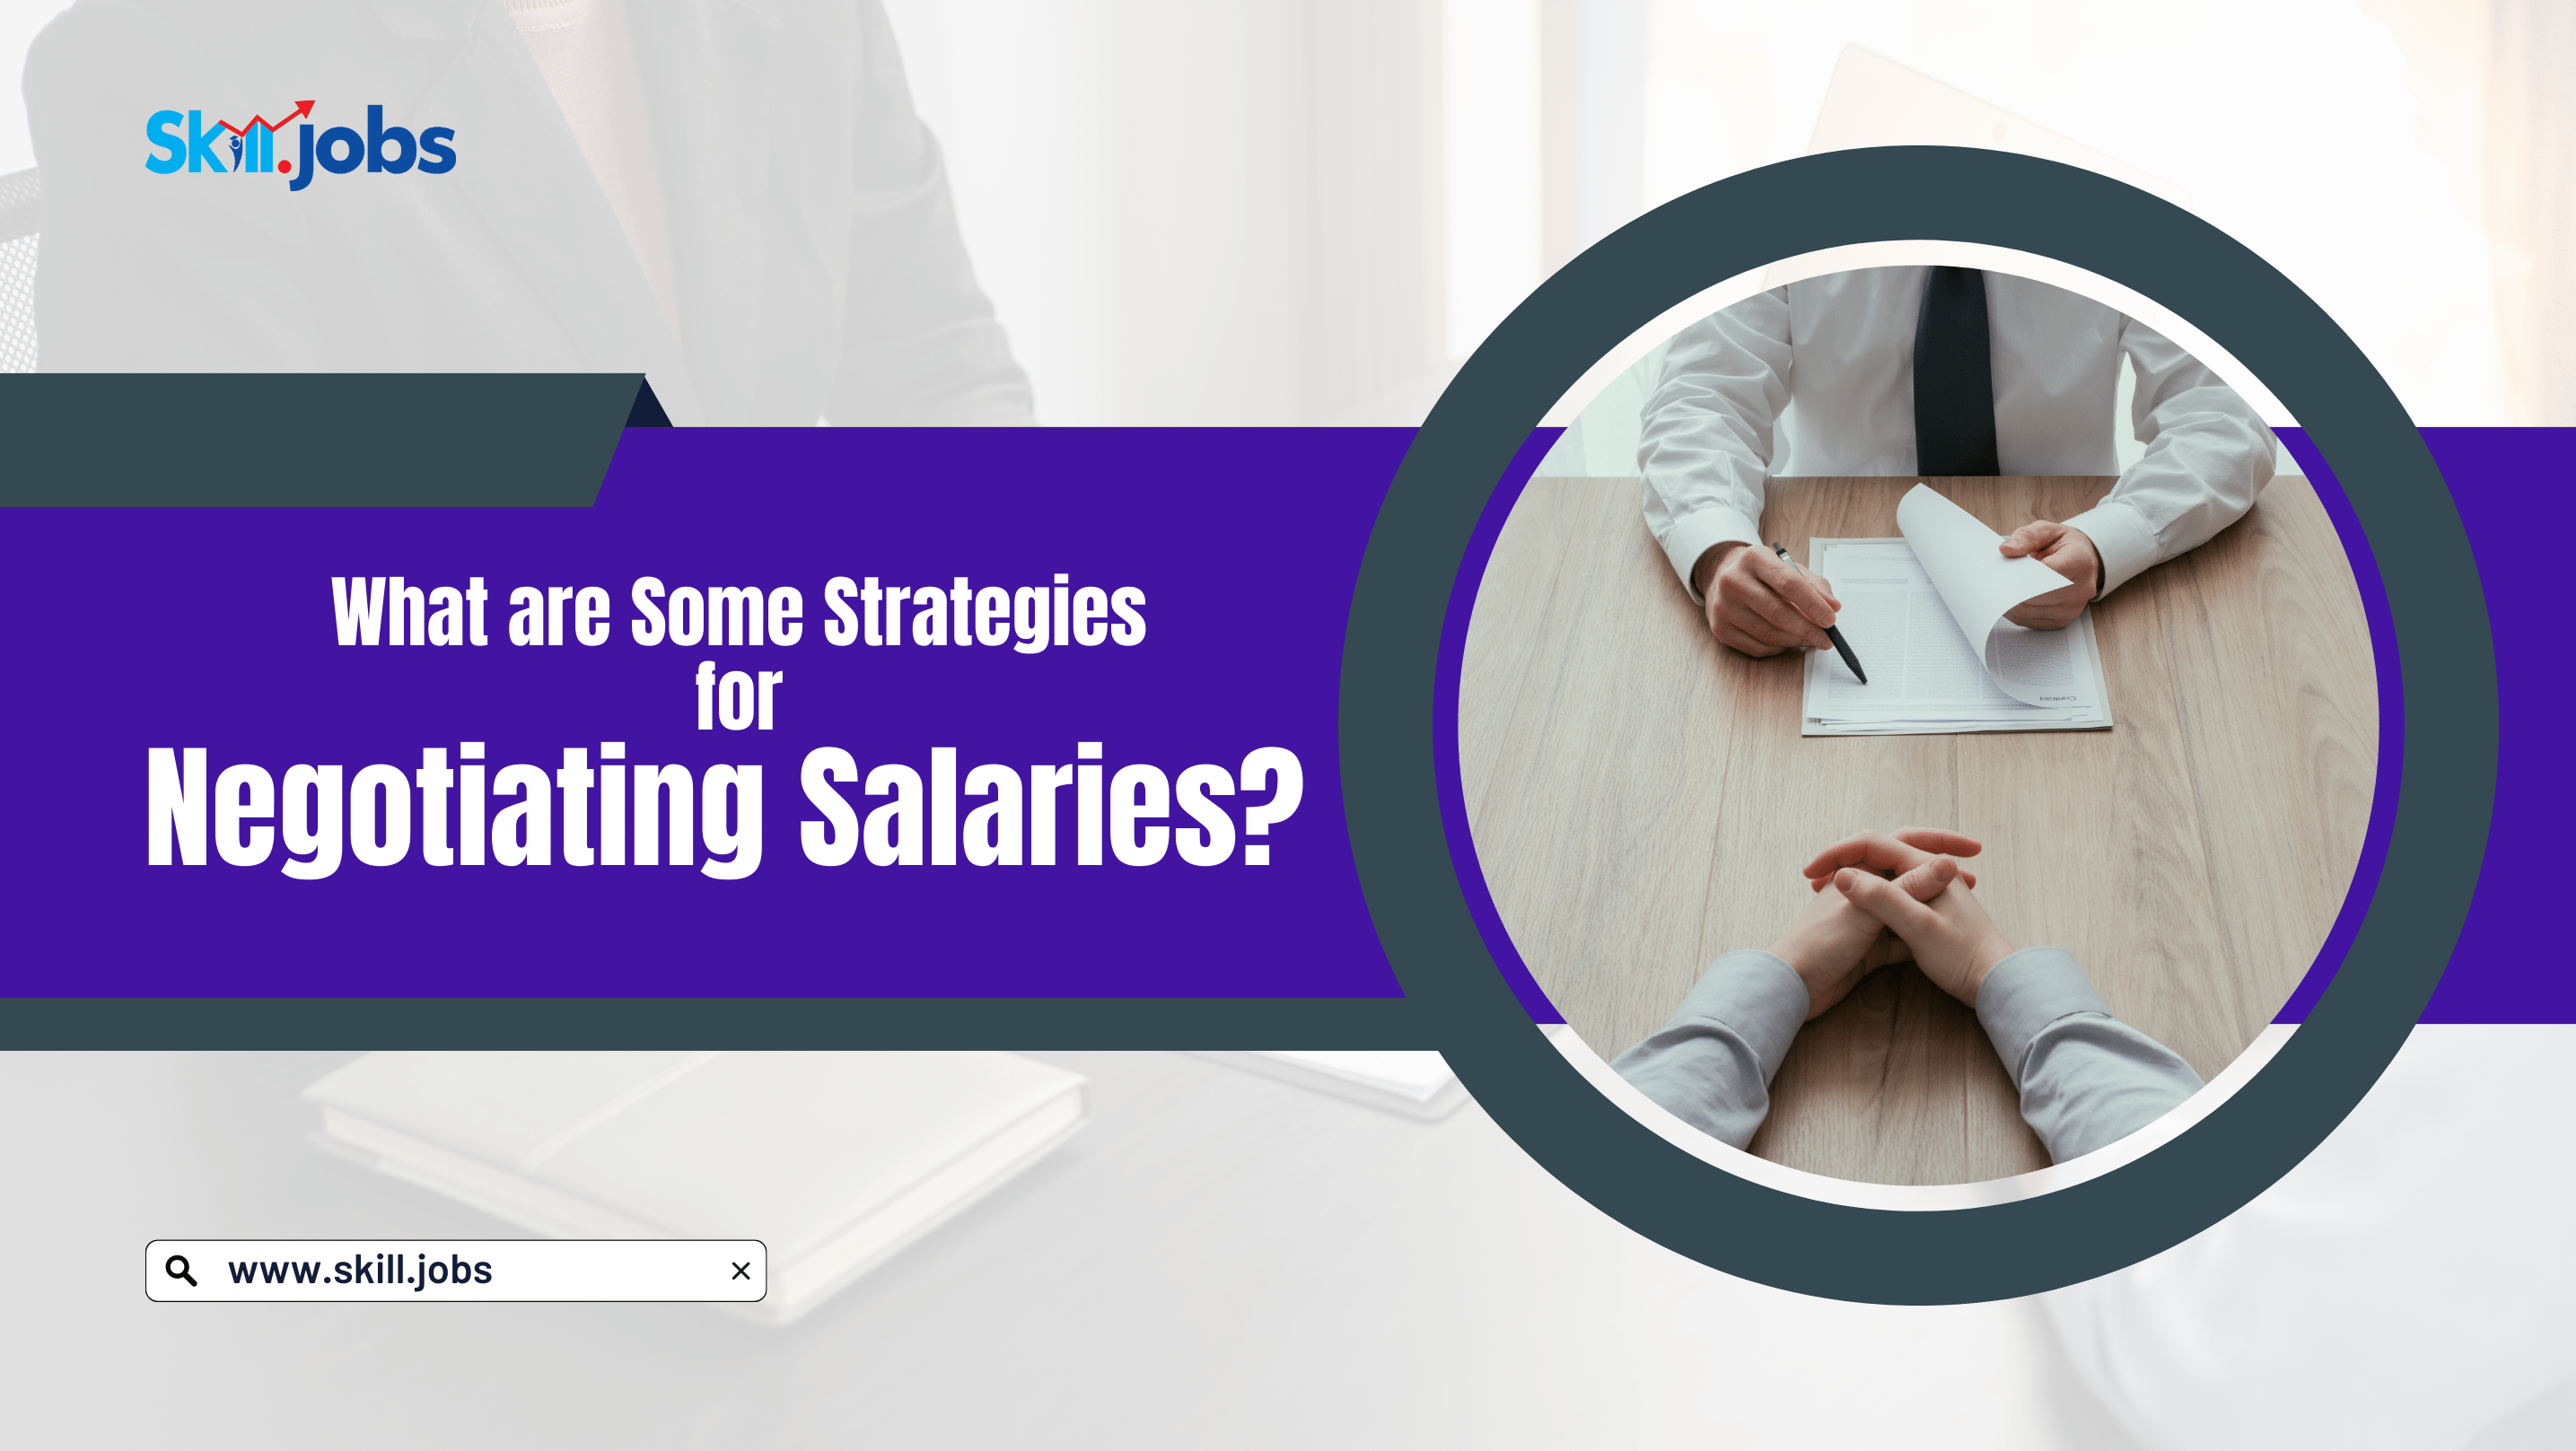 What are Some Strategies for Negotiating Salaries?